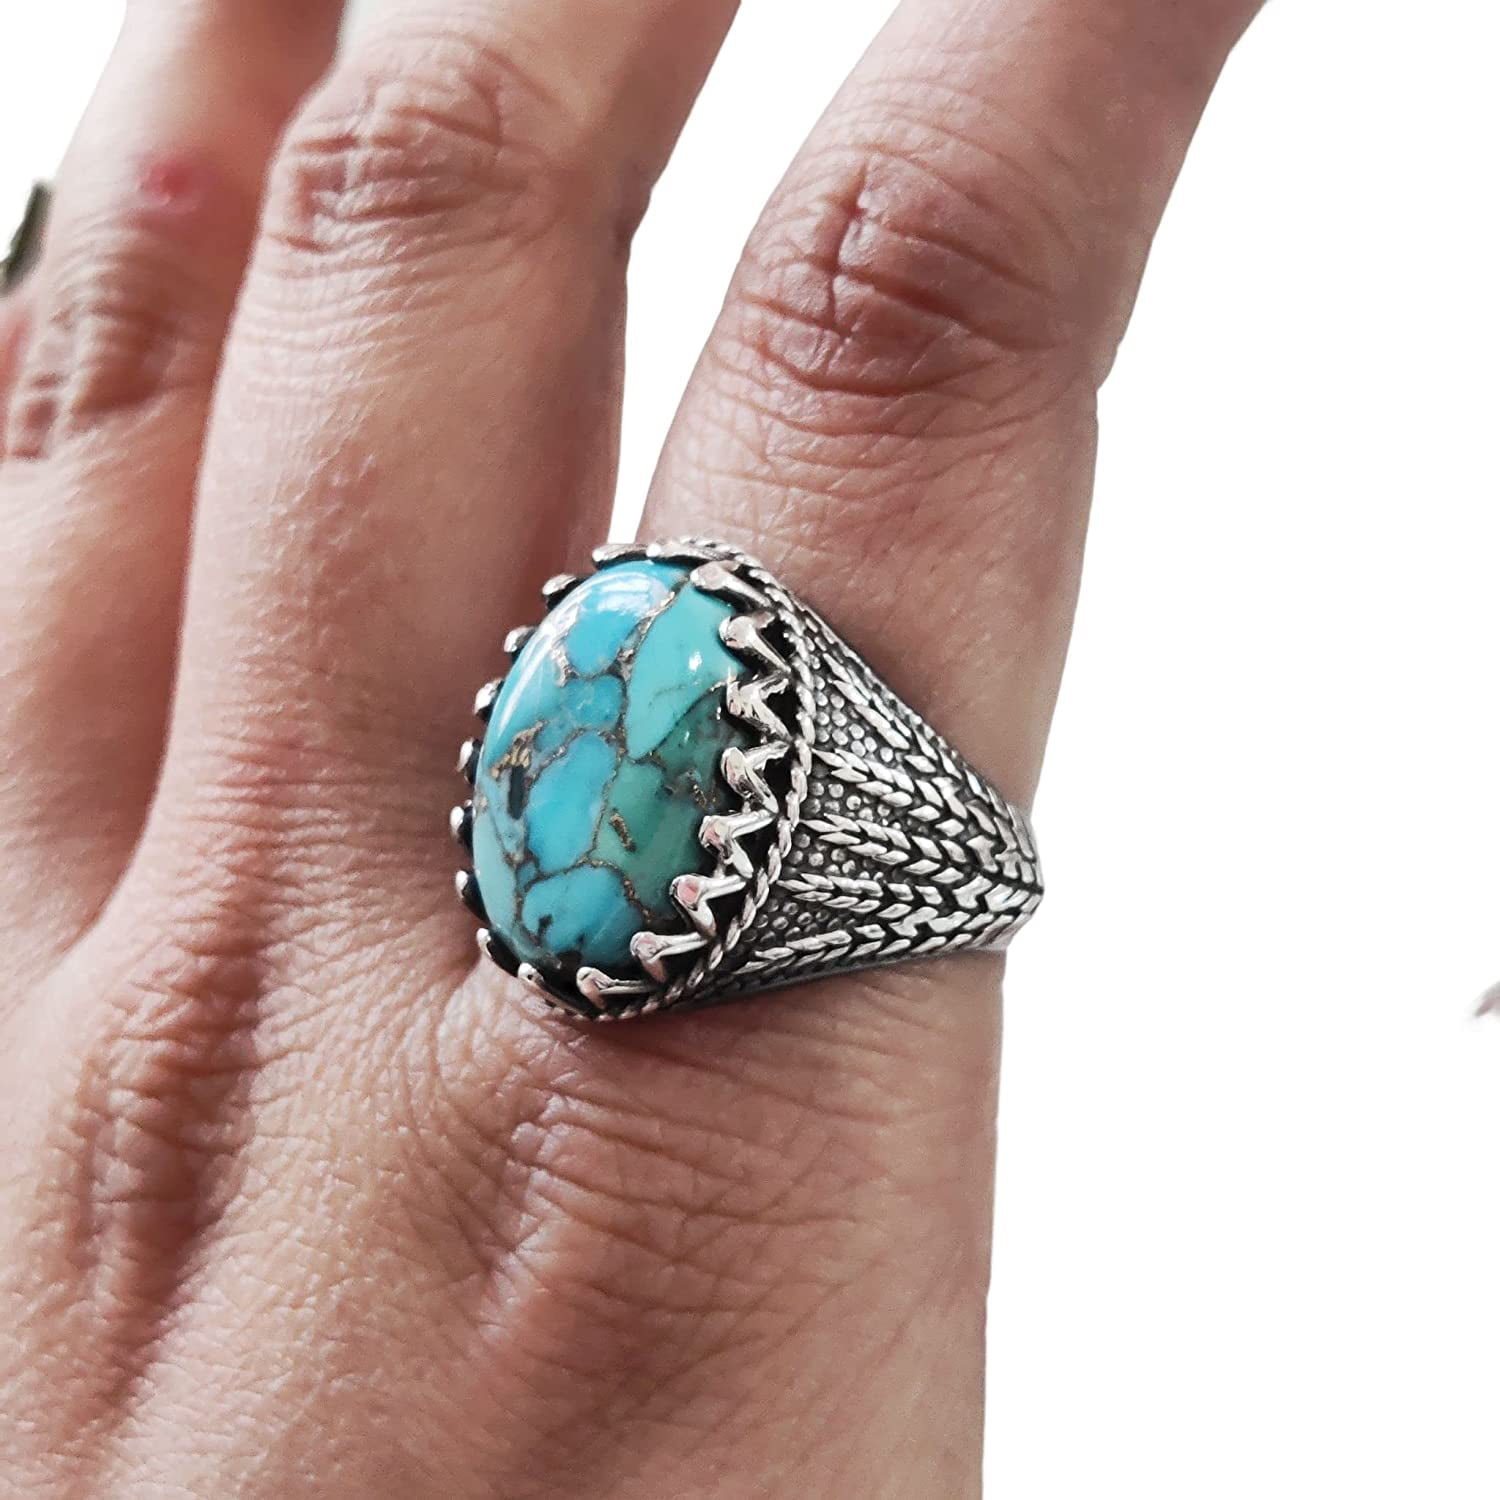 Turquoise Men Ring With Micro Turquoise Stones | Boutique Ottoman Exclusive